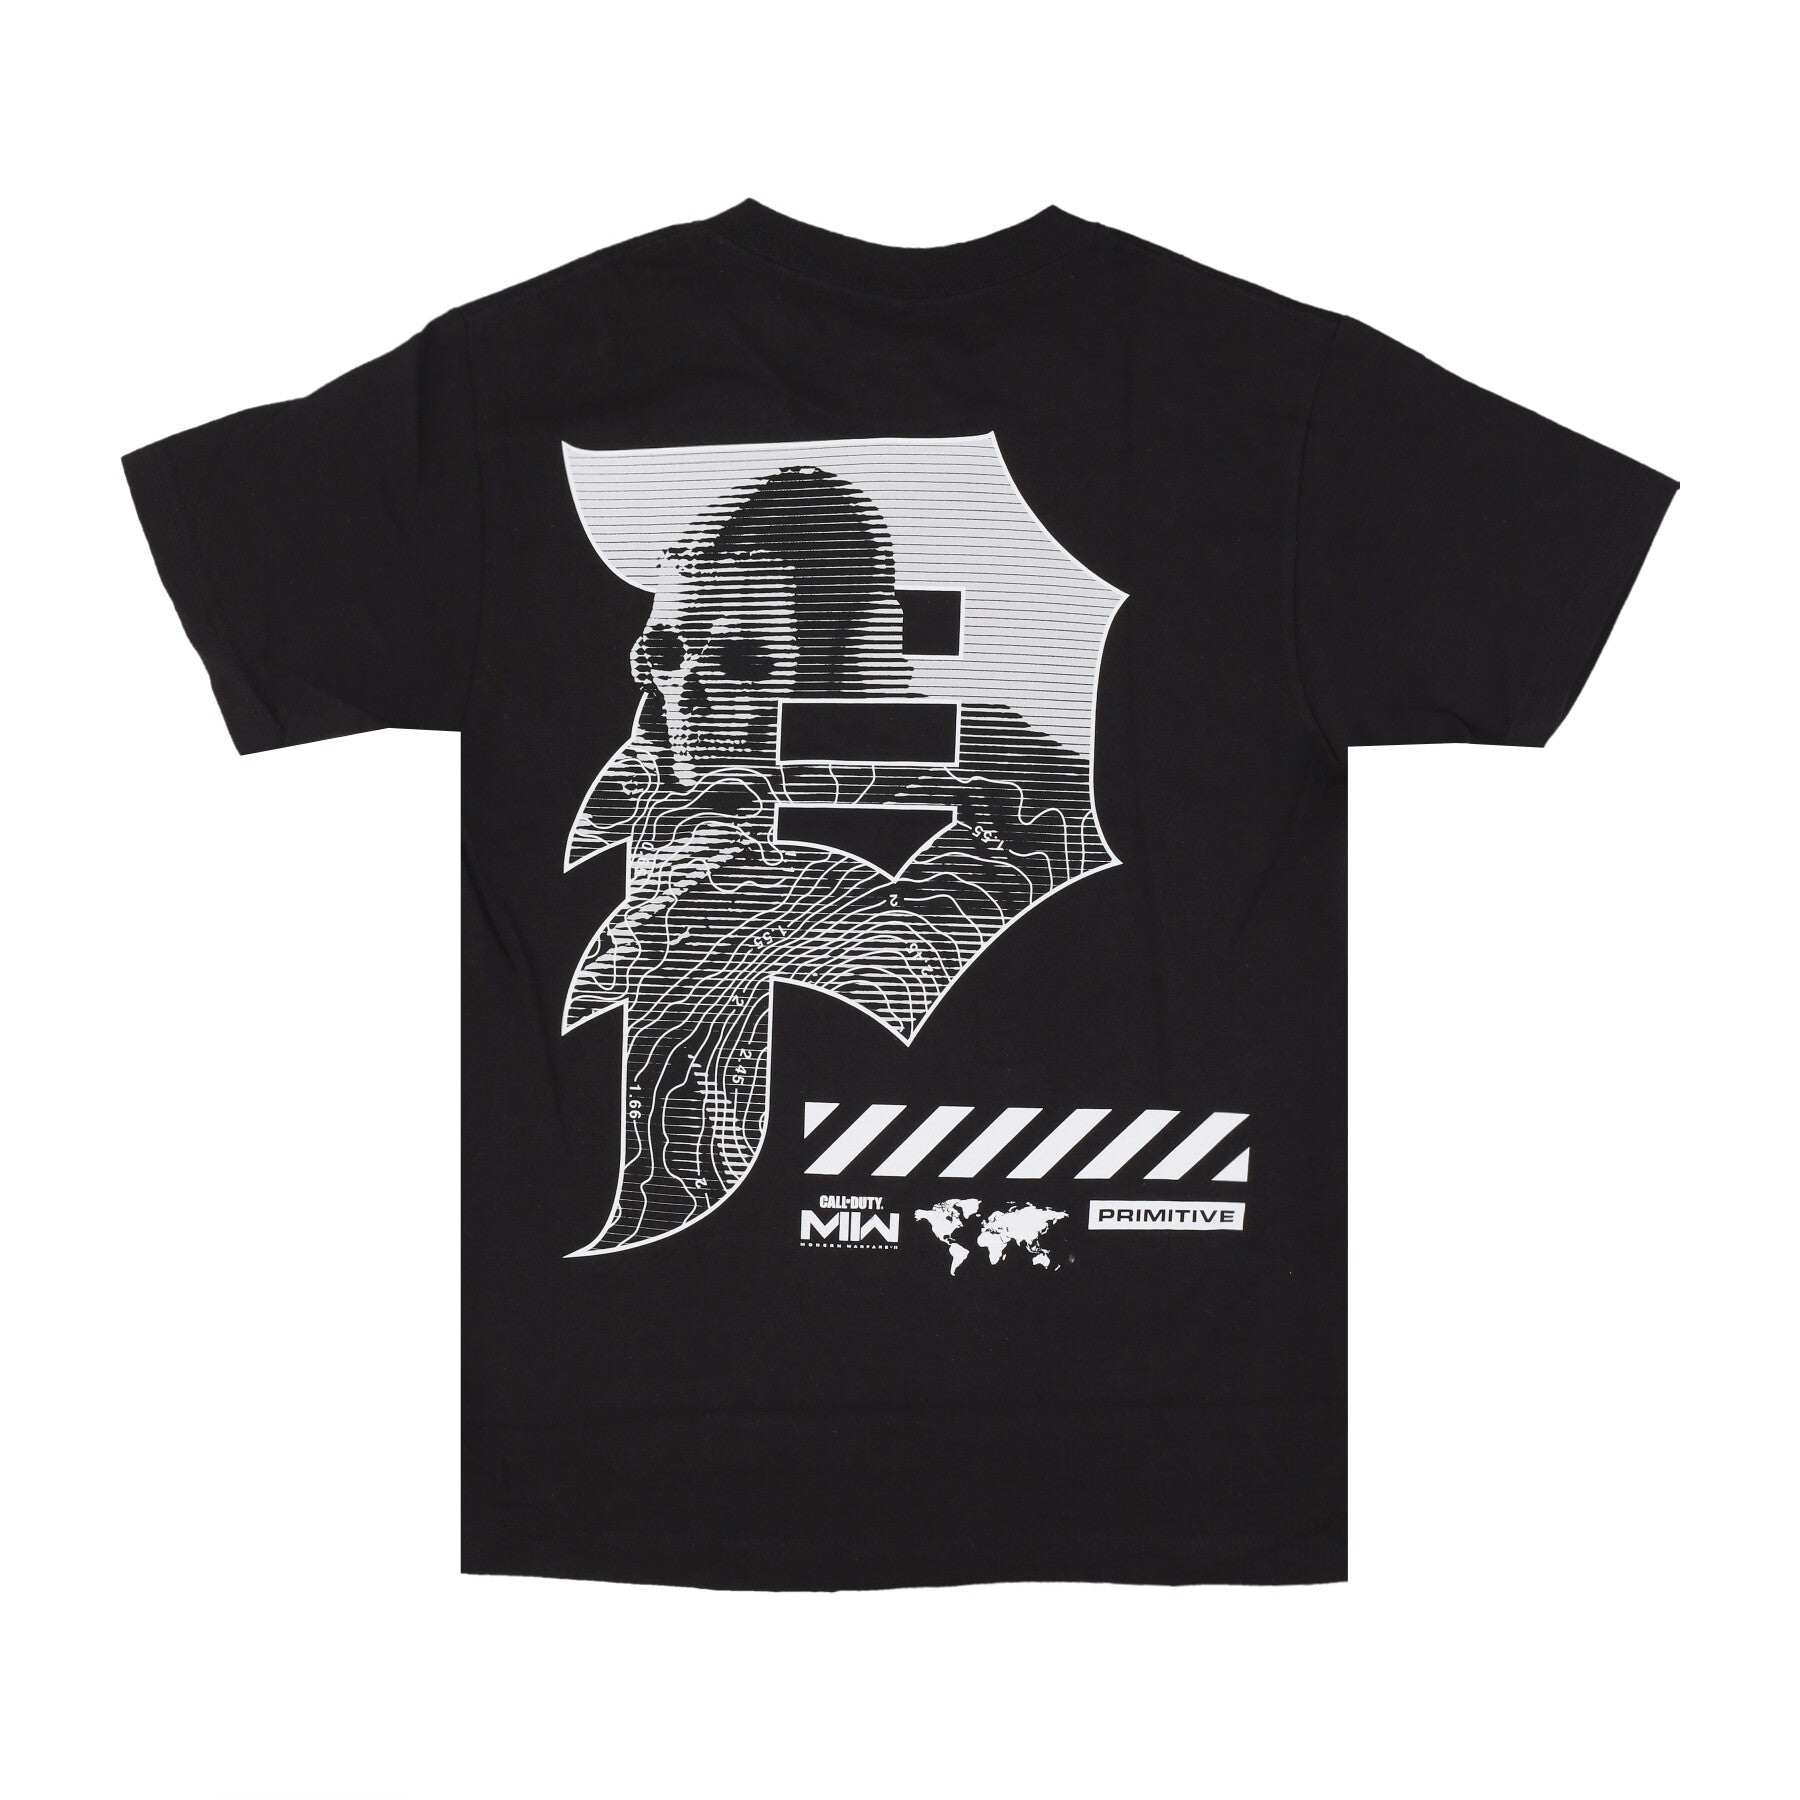 Primitive, Maglietta Uomo Mapping Dirty P Tee X Call Of Duty, 